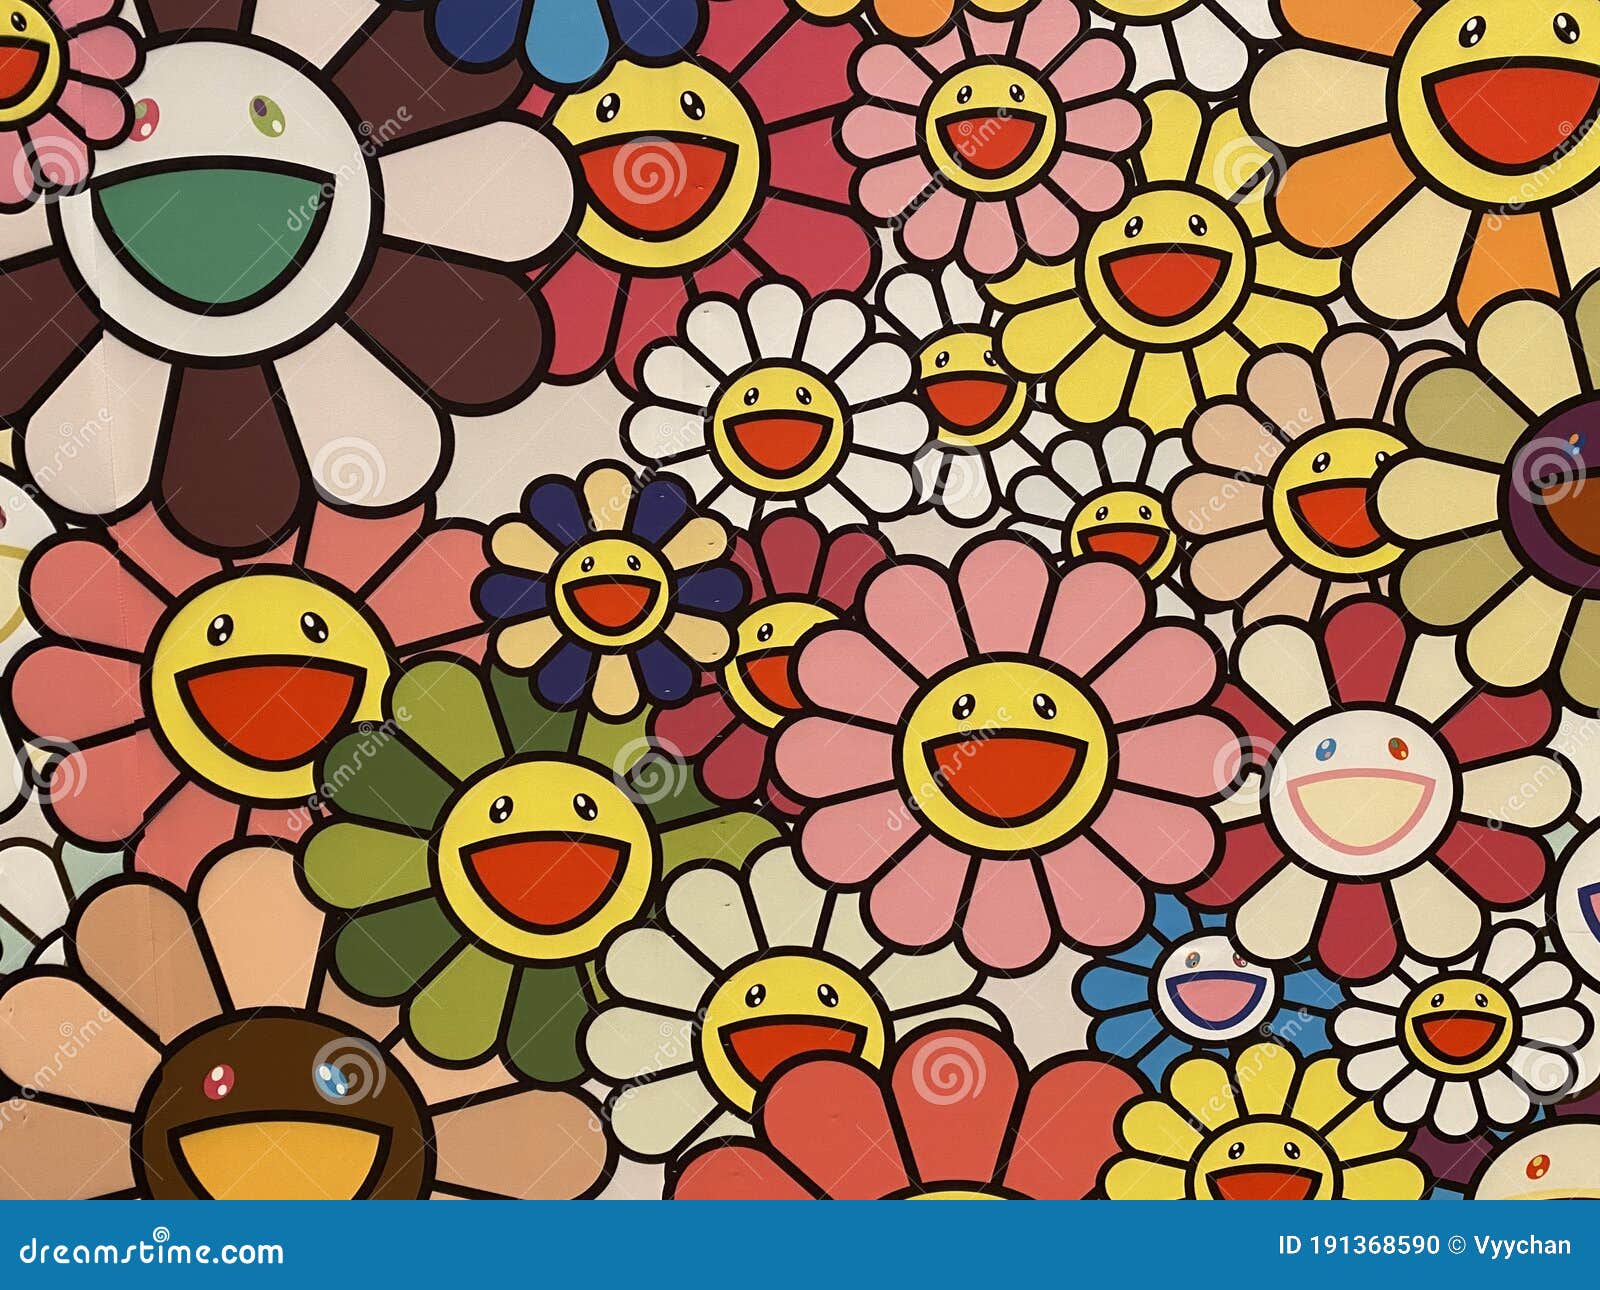 A picture I took at the Takashi Murakami Gallery at the Louis Vuitton  foundation in Paris Its a square but I cropped for my wallpaper and it  looks reallly nice thought you